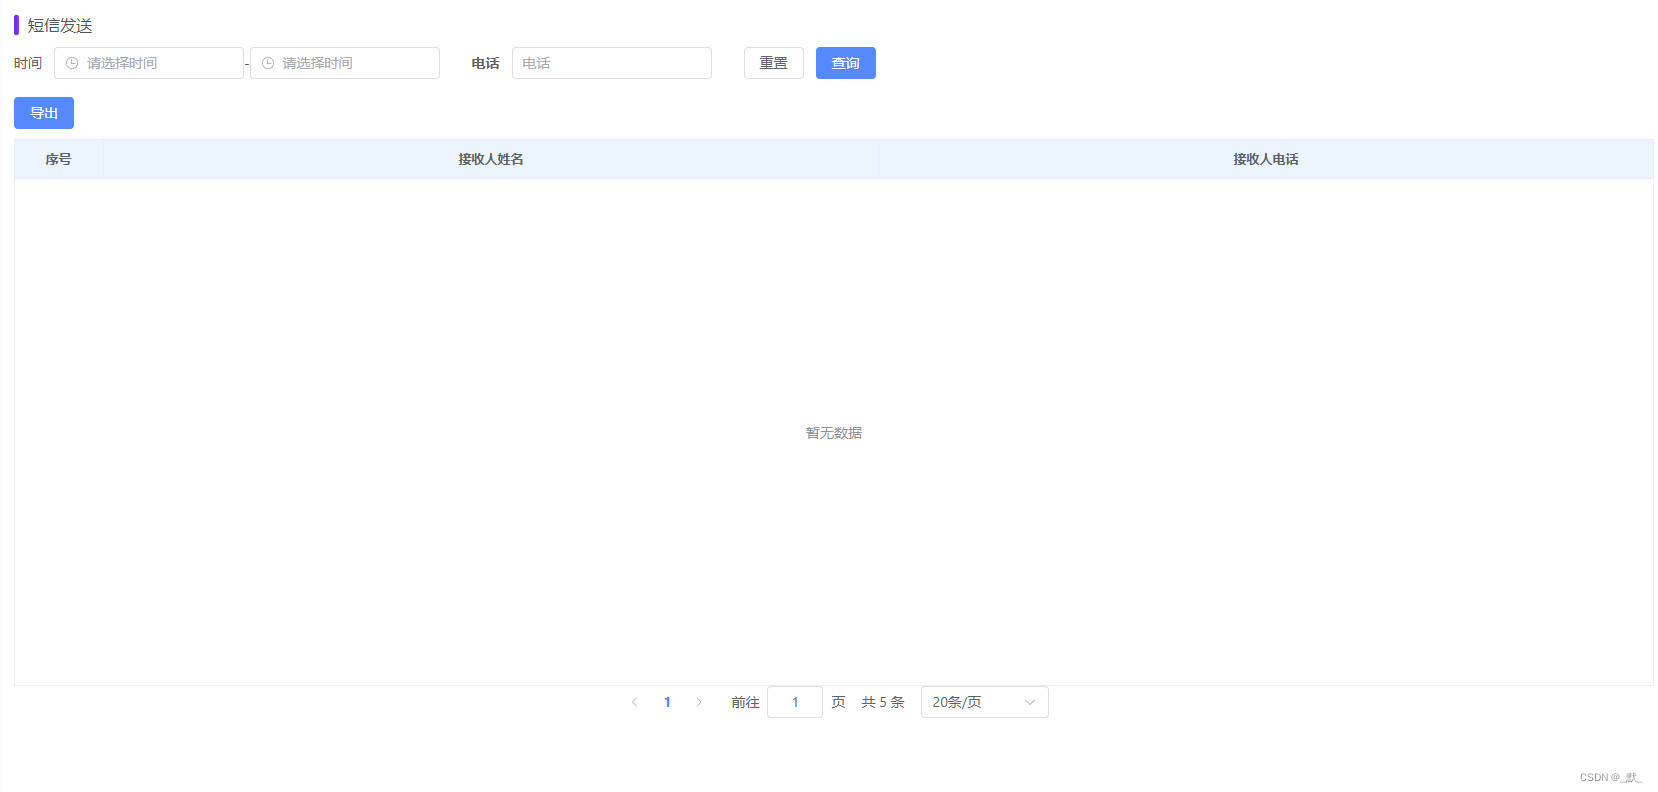 vue3 依赖-<span style='color:red;'>组件</span>tablepage-vue3 项目公共<span style='color:red;'>配置</span><span style='color:red;'>封装</span>